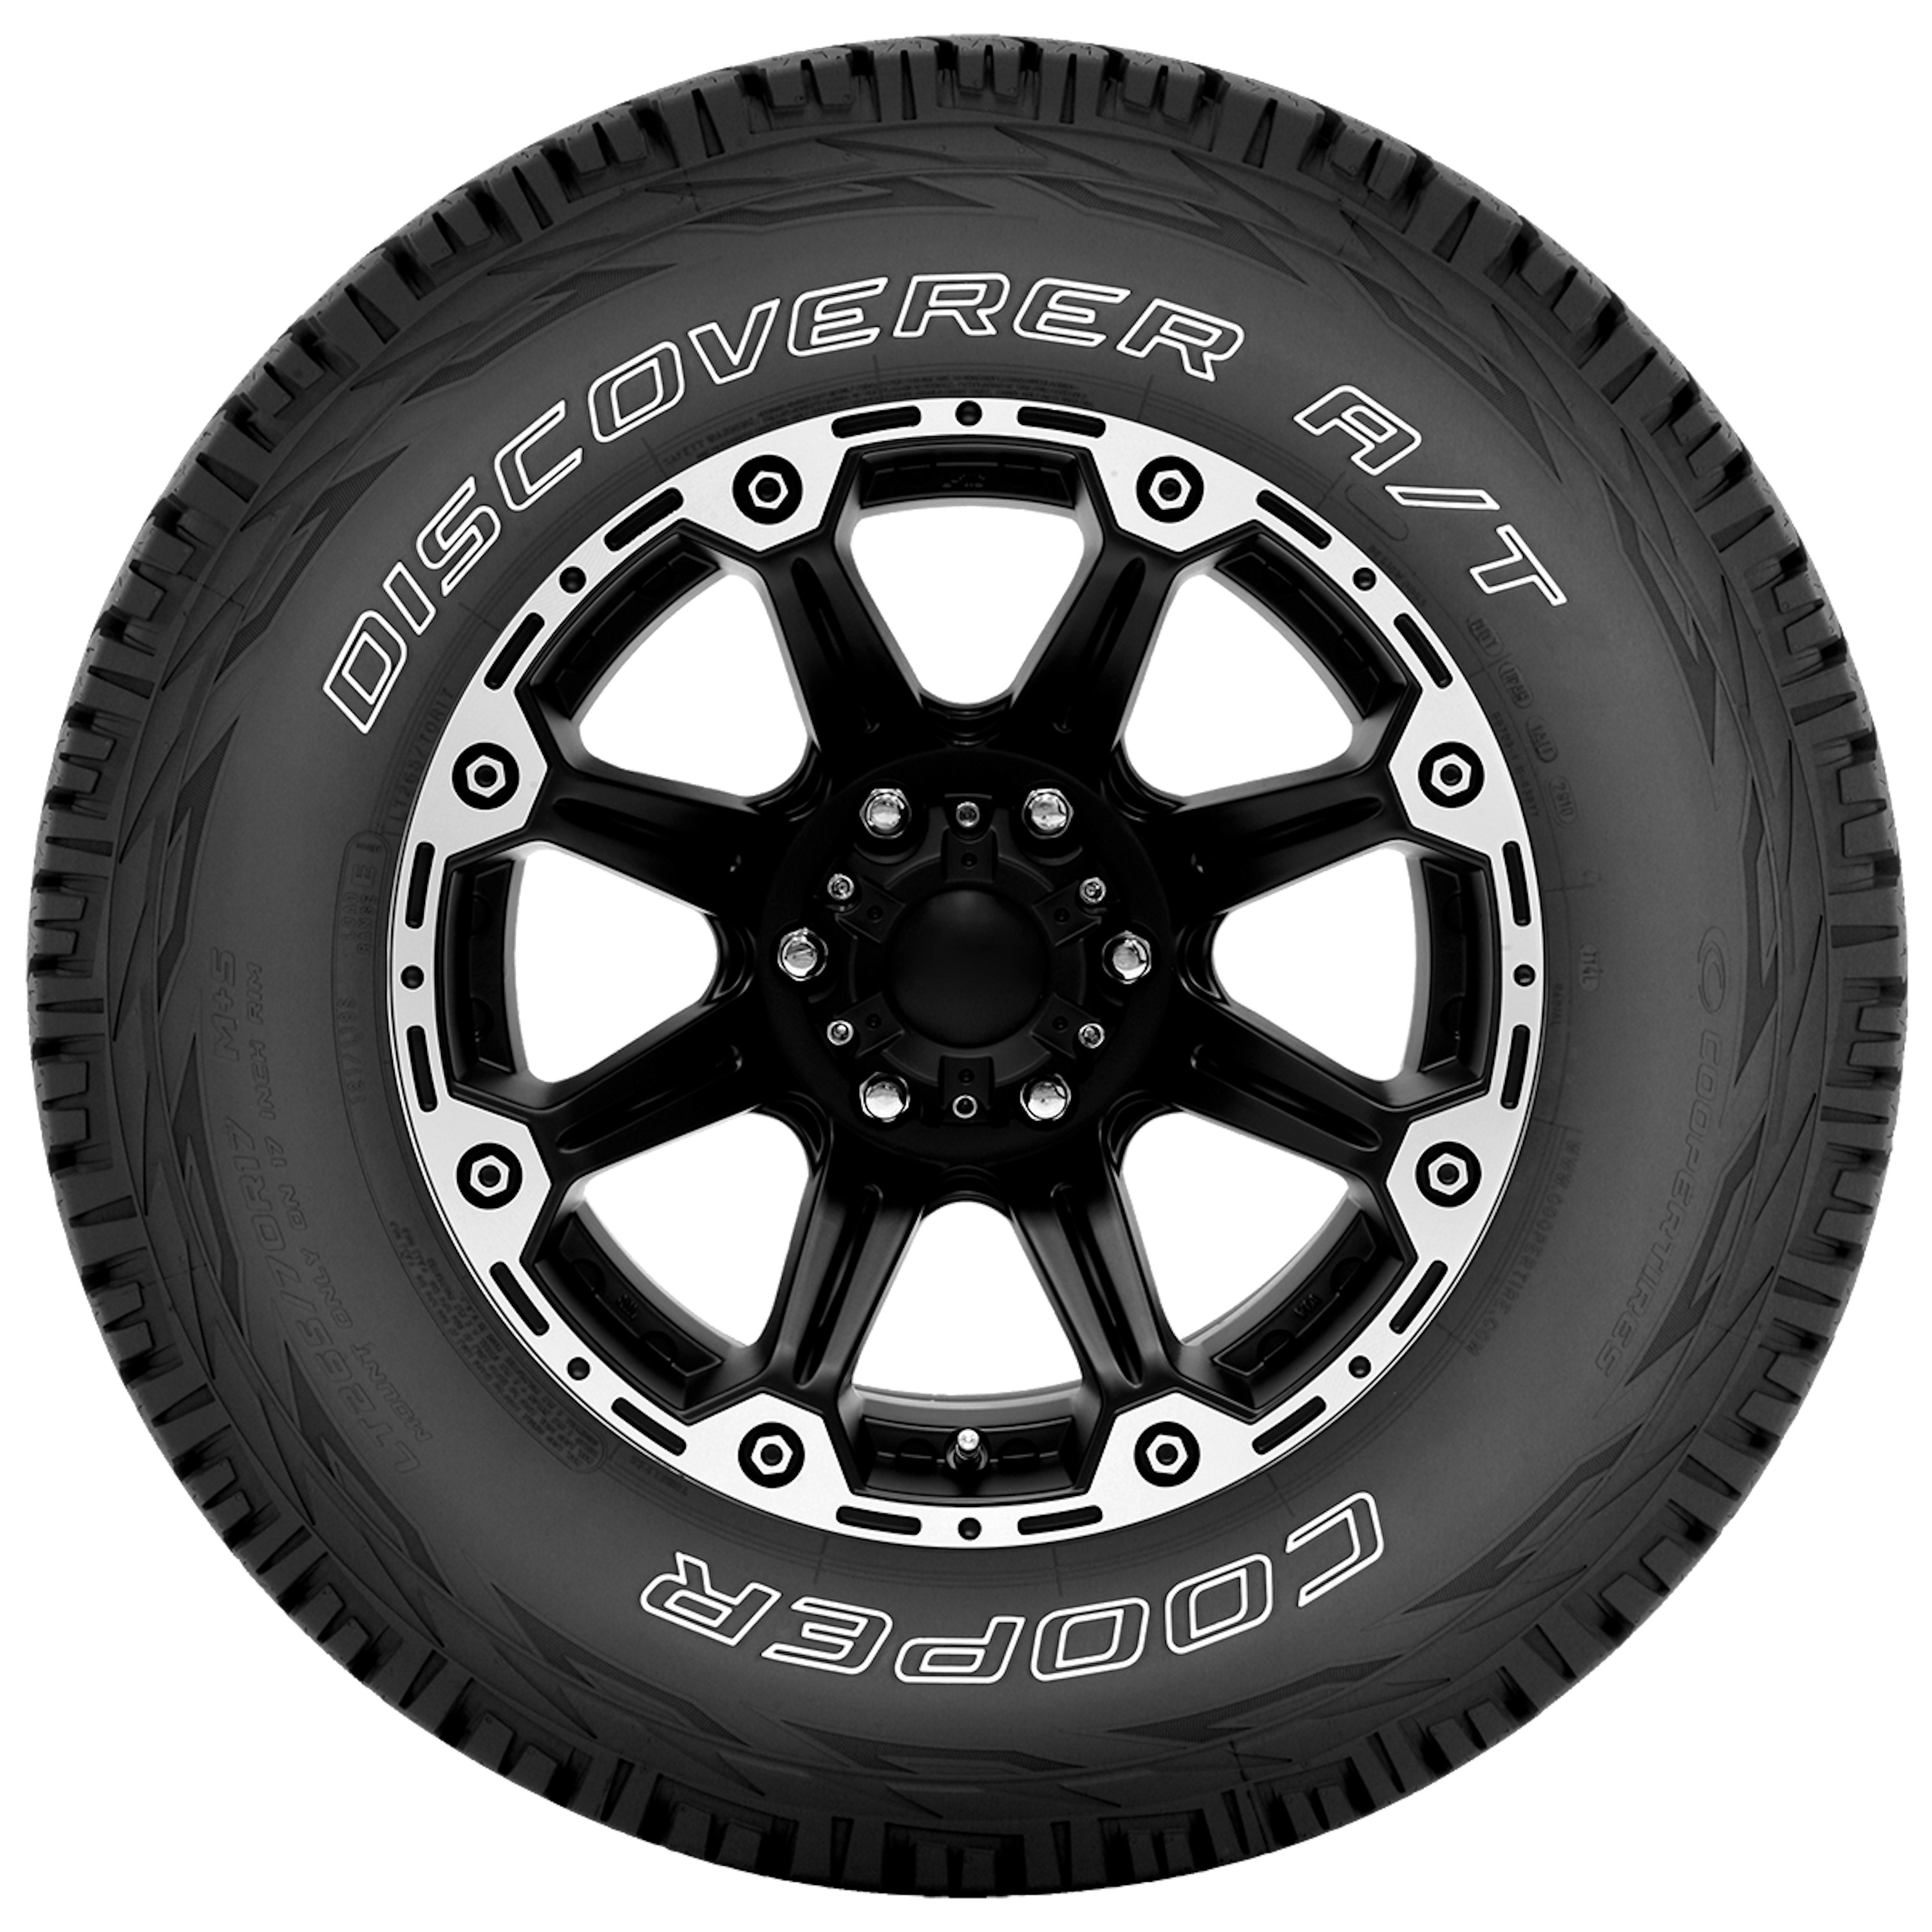 Cooper Discoverer A/T All-Season 275/55R20 117T Tire Fits: 2014-18 Chevrolet Silverado 1500 High Country, 2011-18 GMC Sierra 1500 Denali - image 2 of 8